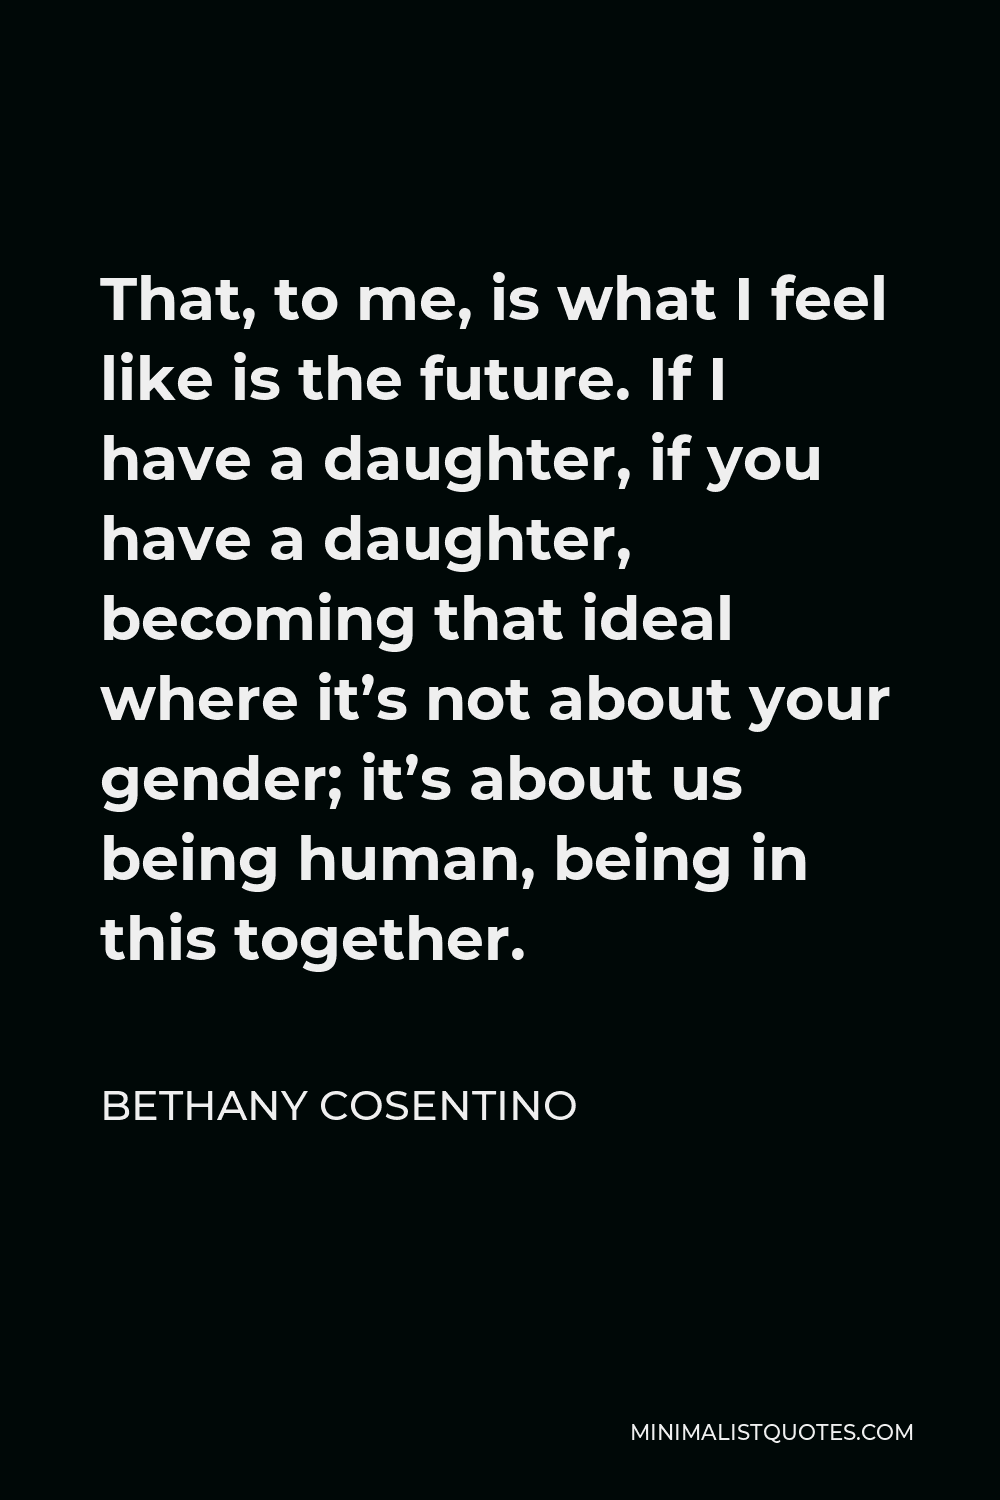 Bethany Cosentino Quote - That, to me, is what I feel like is the future. If I have a daughter, if you have a daughter, becoming that ideal where it’s not about your gender; it’s about us being human, being in this together.